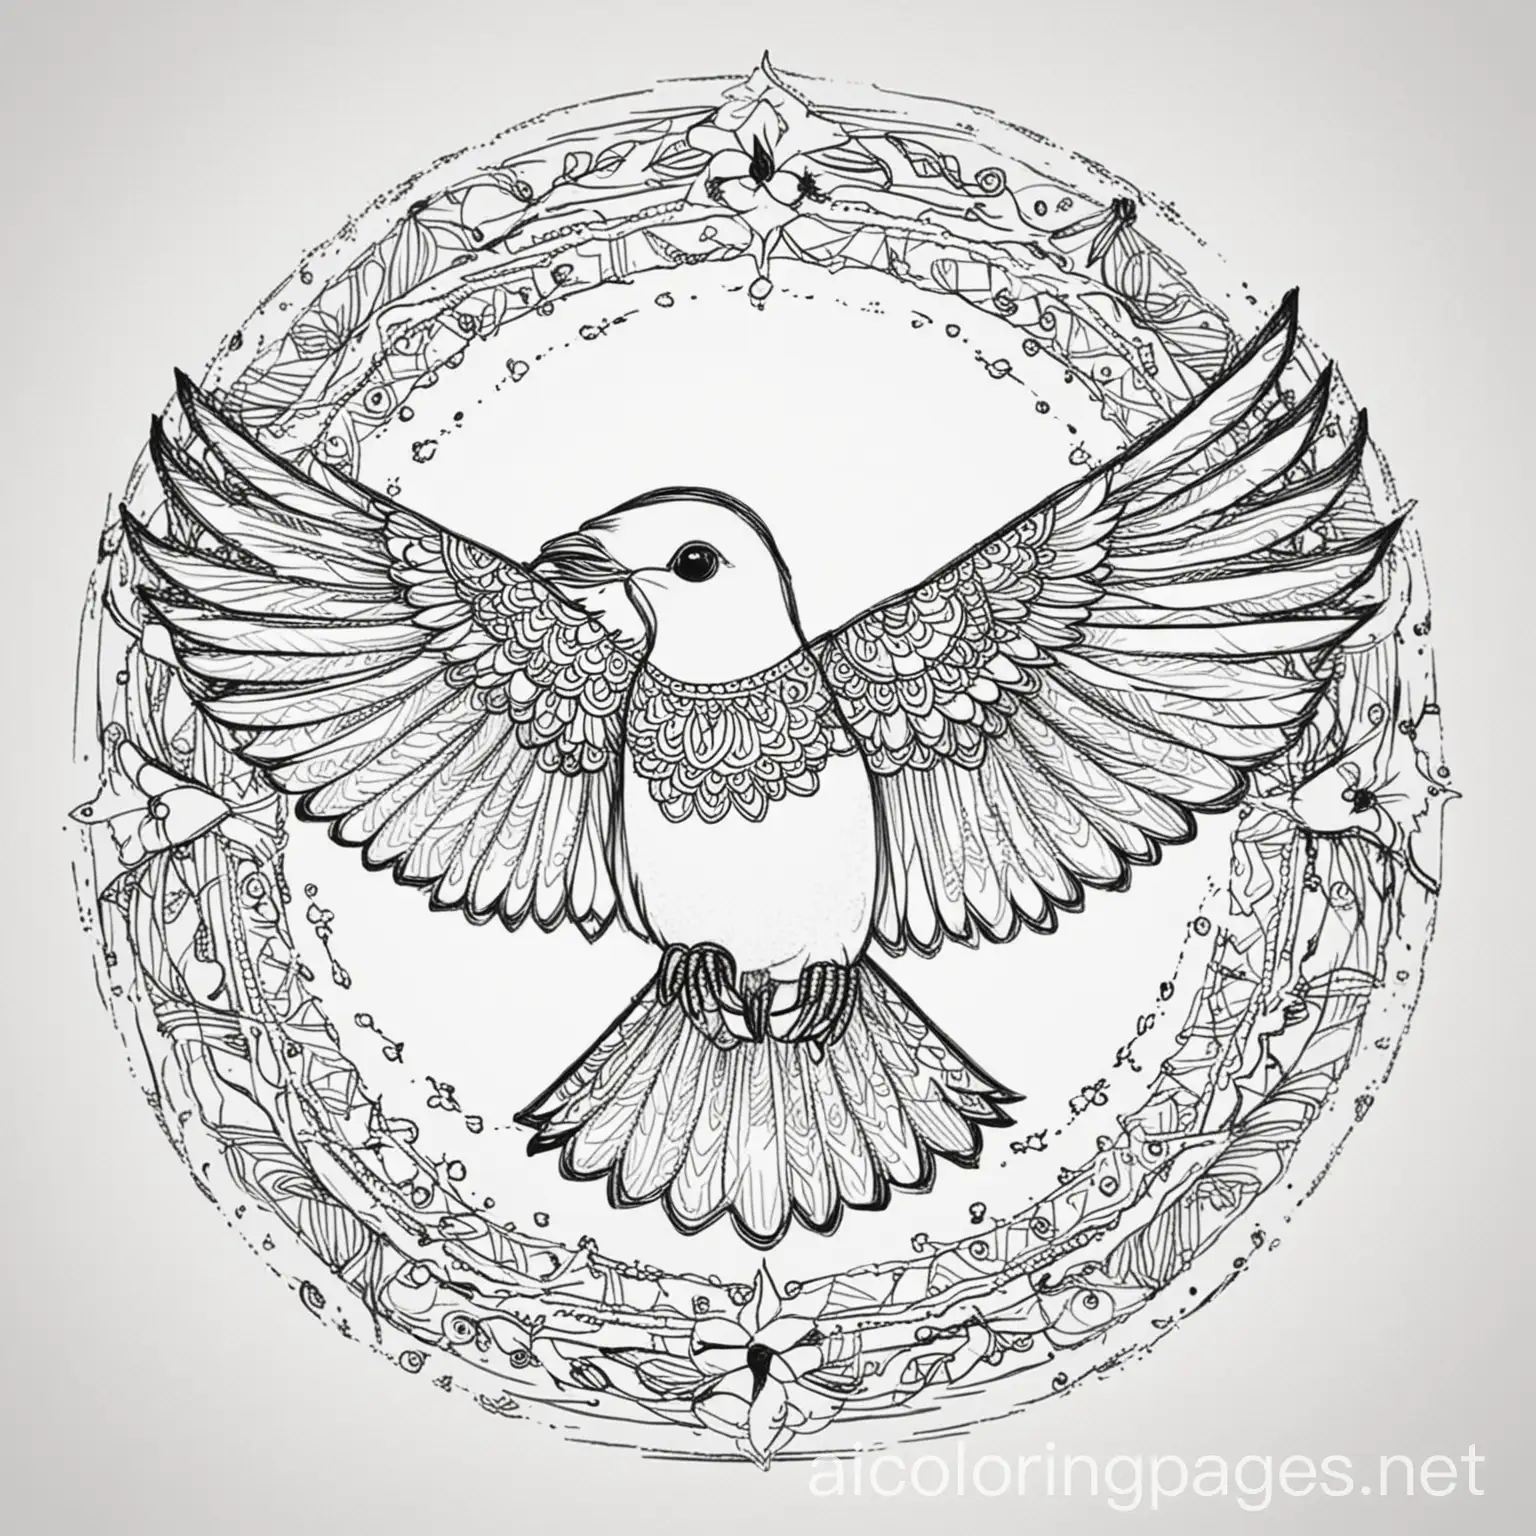 Flying Bird mandala, Coloring Page, black and white, line art, white background, Simplicity, Ample White Space. The background of the coloring page is plain white to make it easy for young children to color within the lines. The outlines of all the subjects are easy to distinguish, making it simple for kids to color without too much difficulty